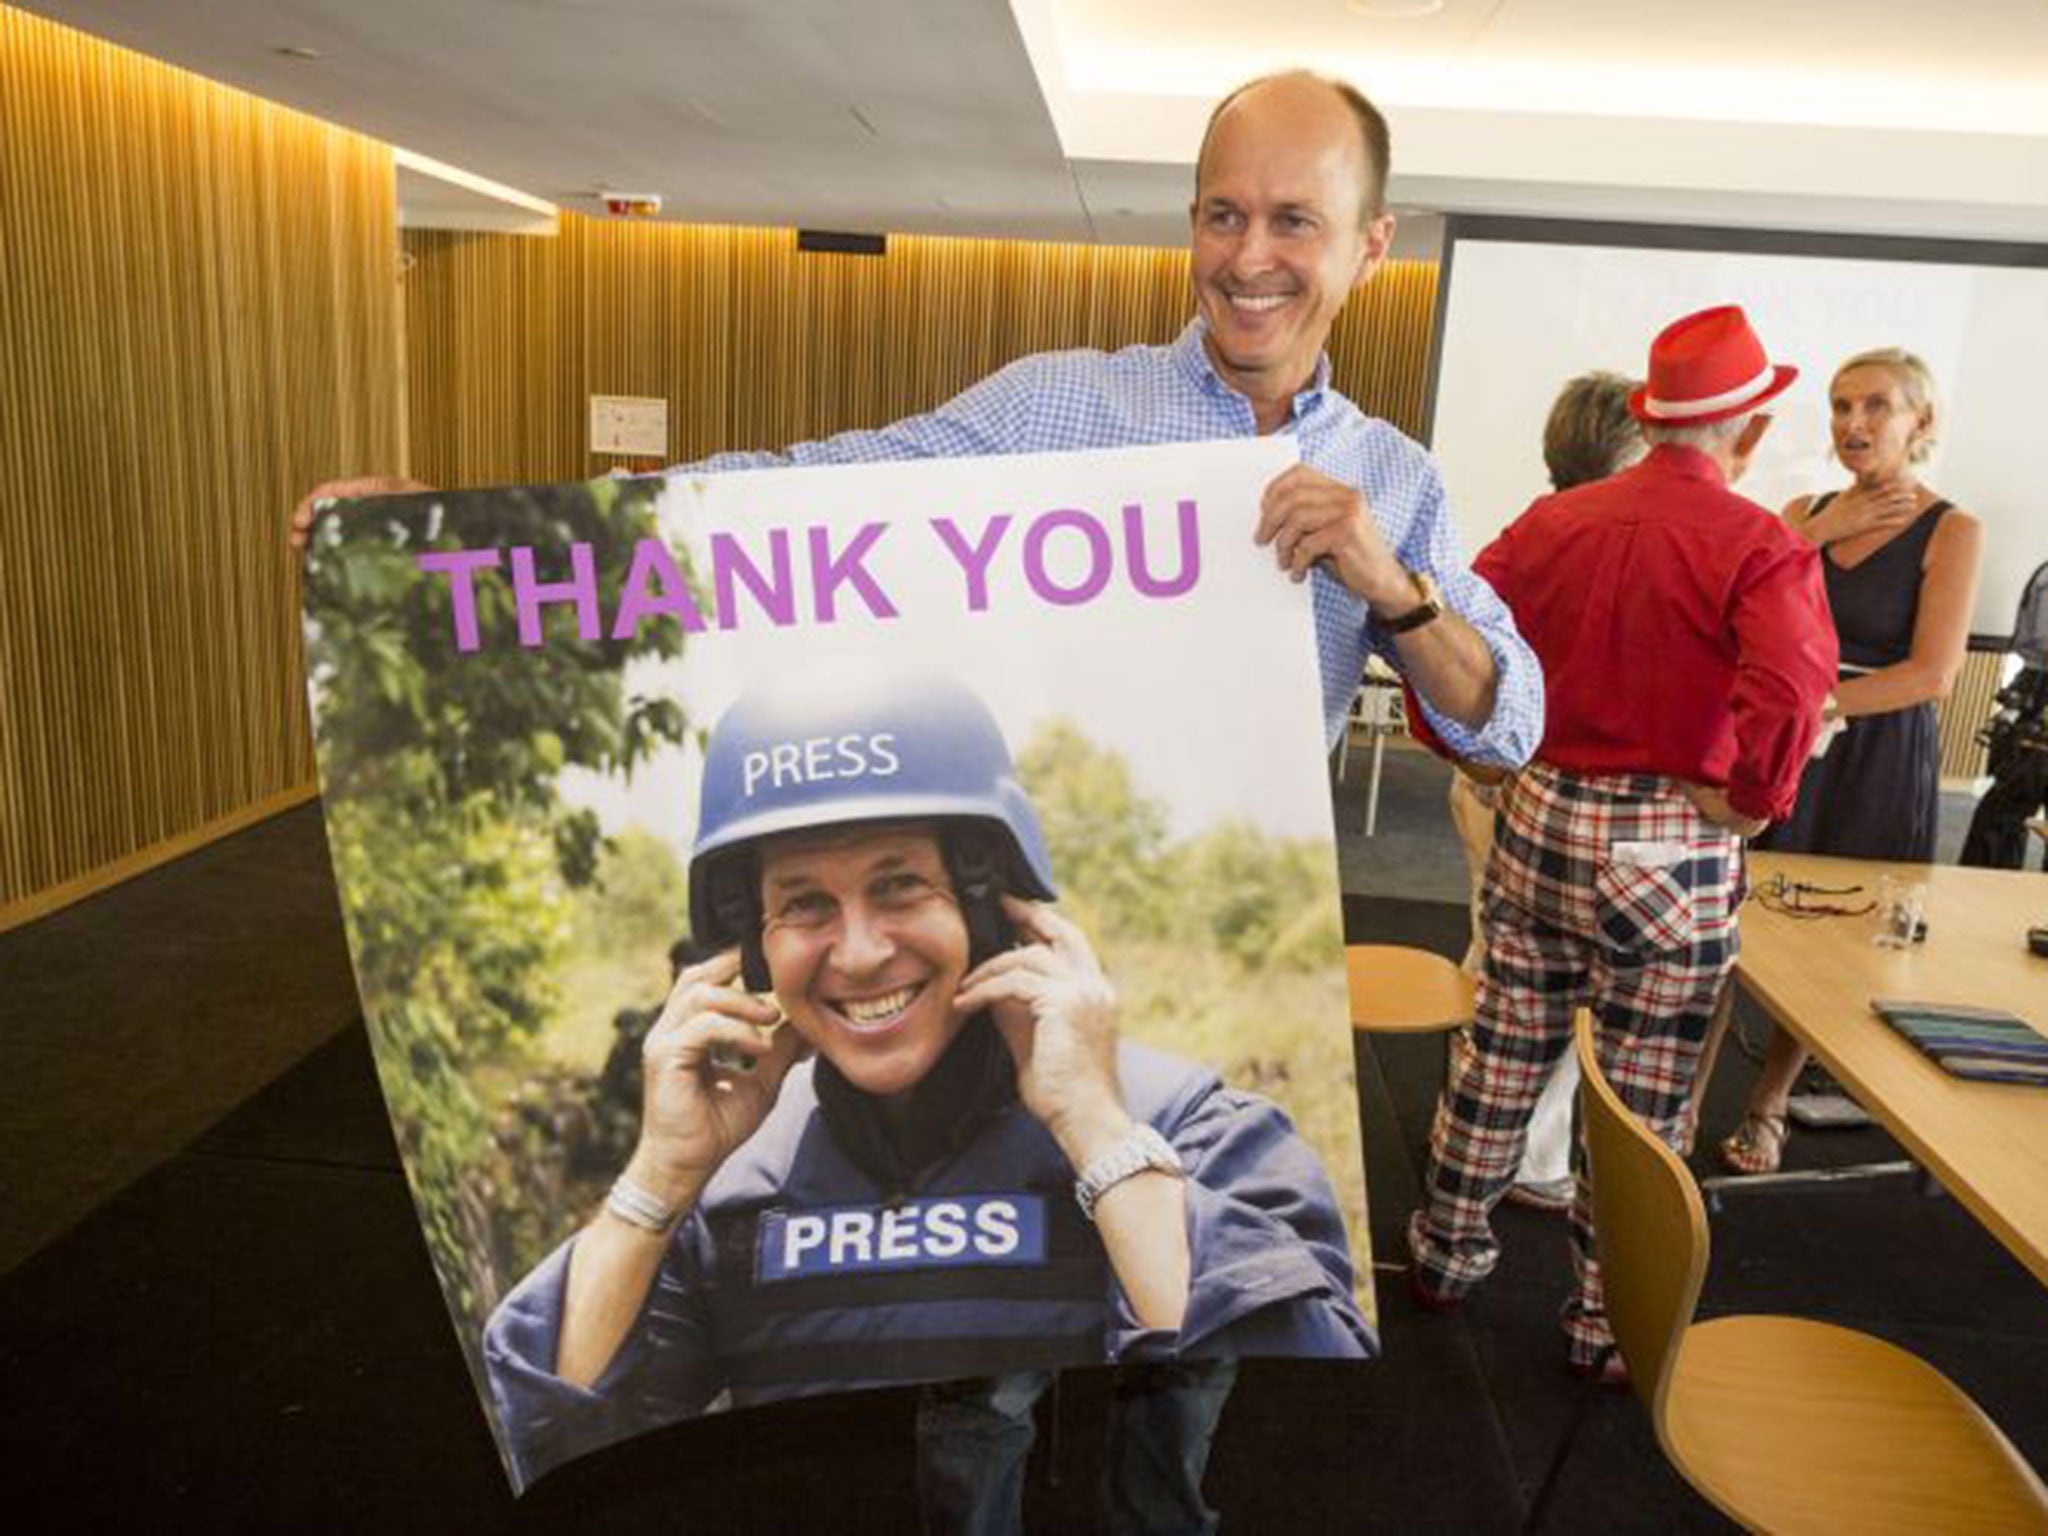 Andrew Greste, brother of Peter Greste, after the latter's release